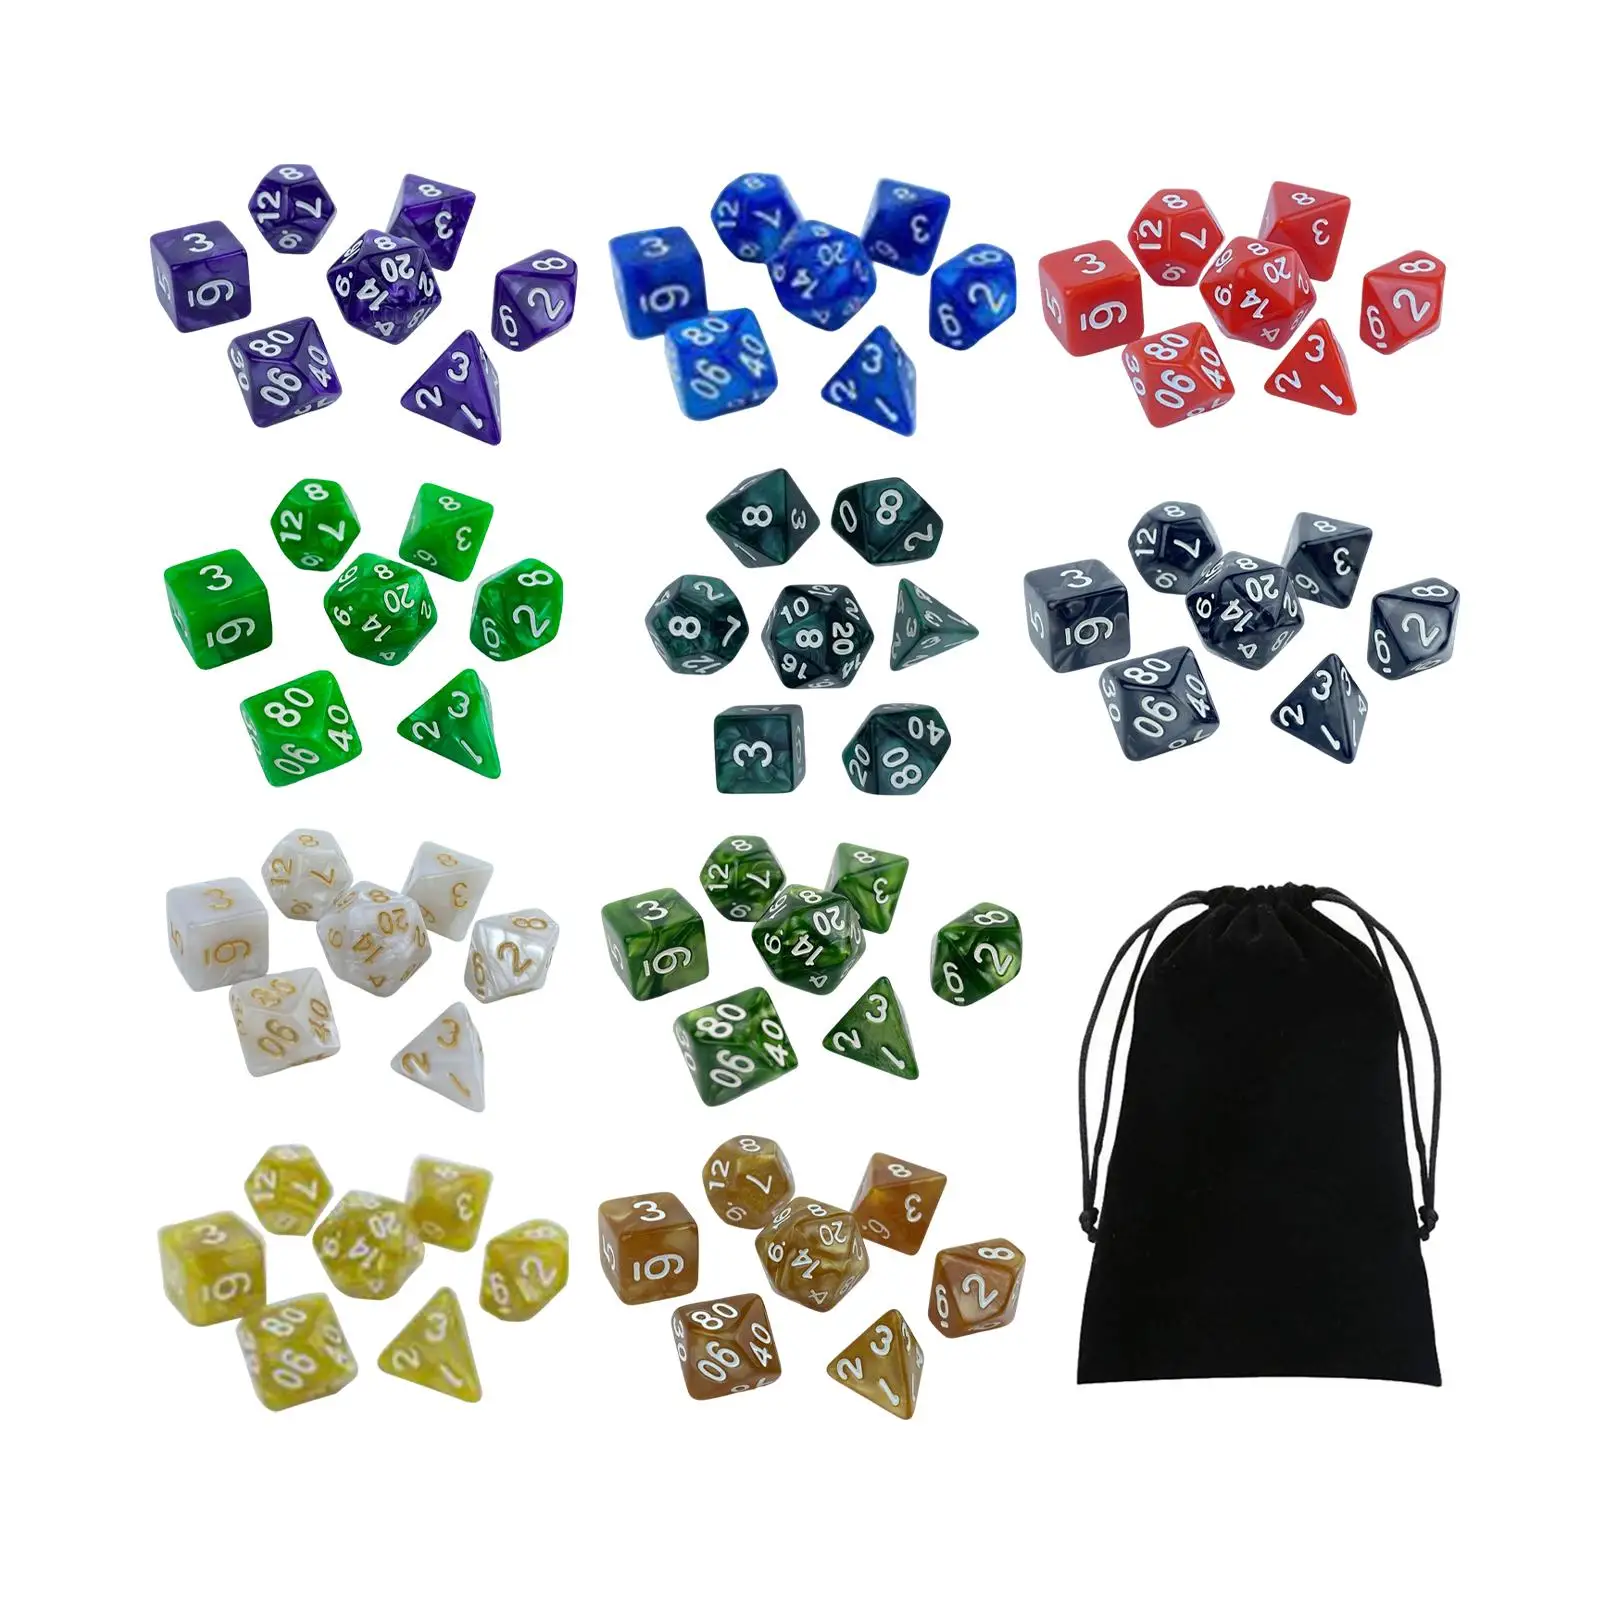 70 Pieces Acrylic Polyhedral Dice Set Toys, Board Game Props